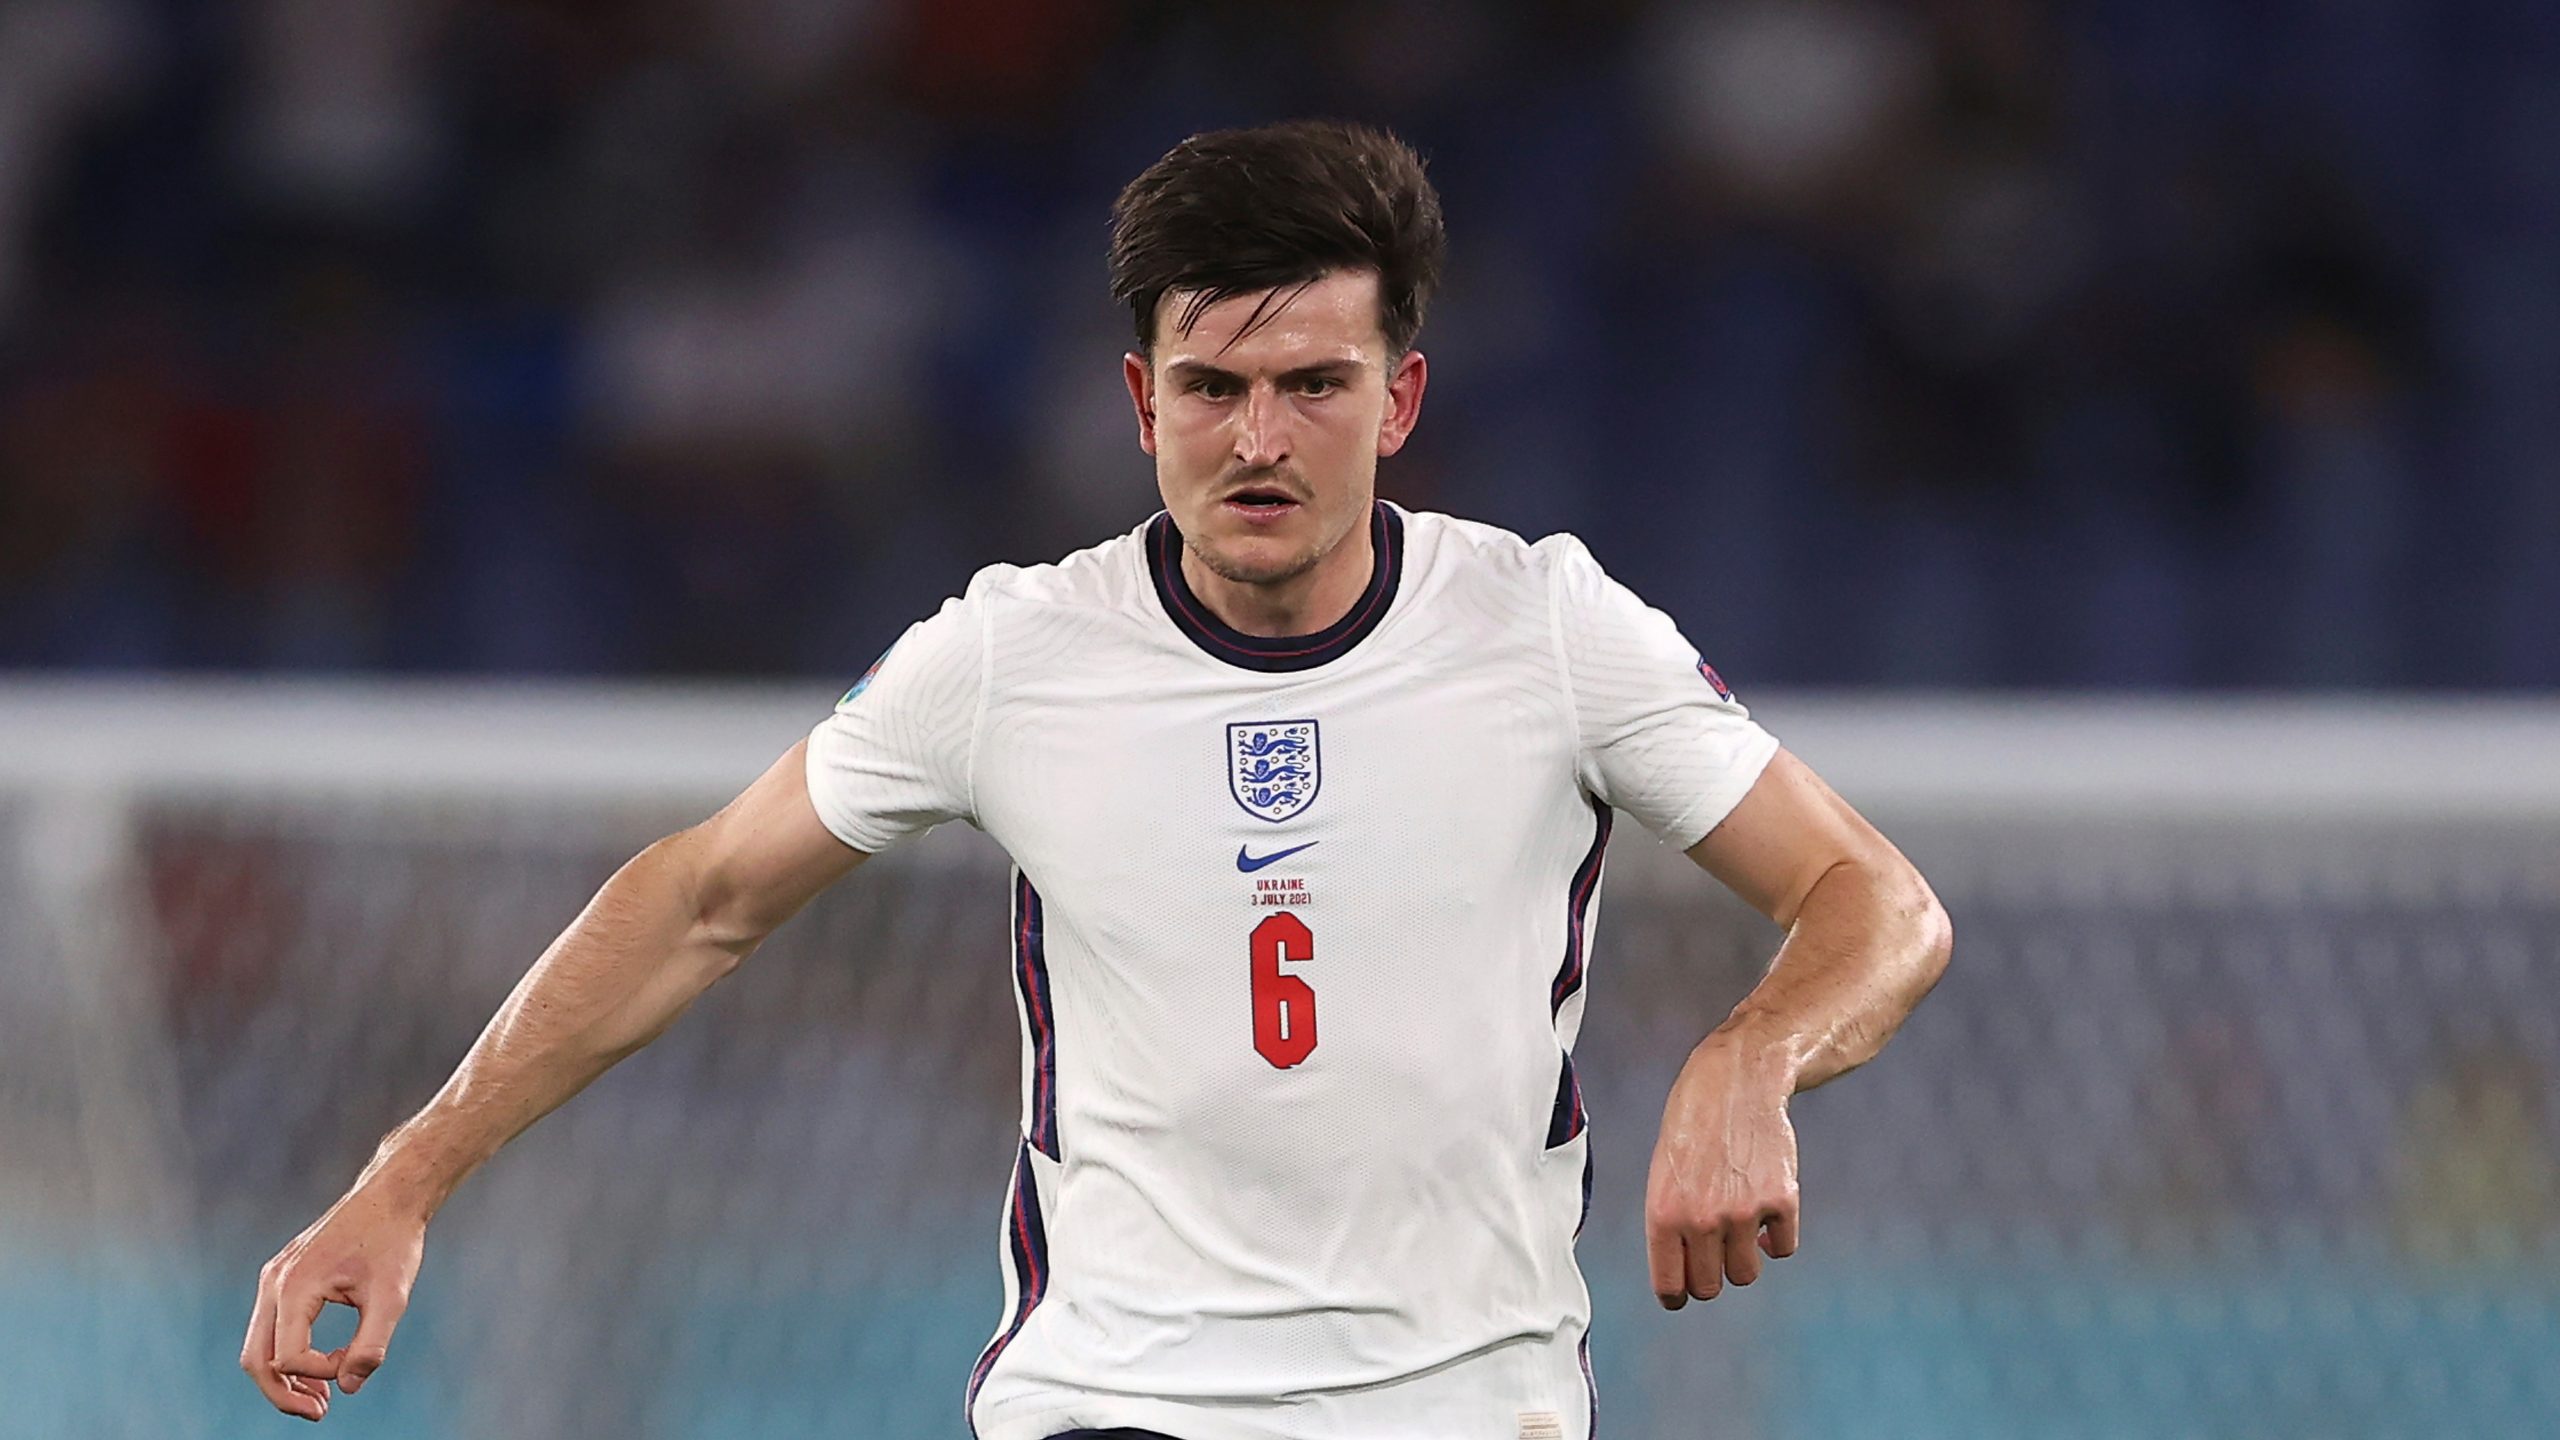 England coaches and players slammed their fan base for booing harry Maguire prior to their friendly against the Ivory Coast earlier in the week